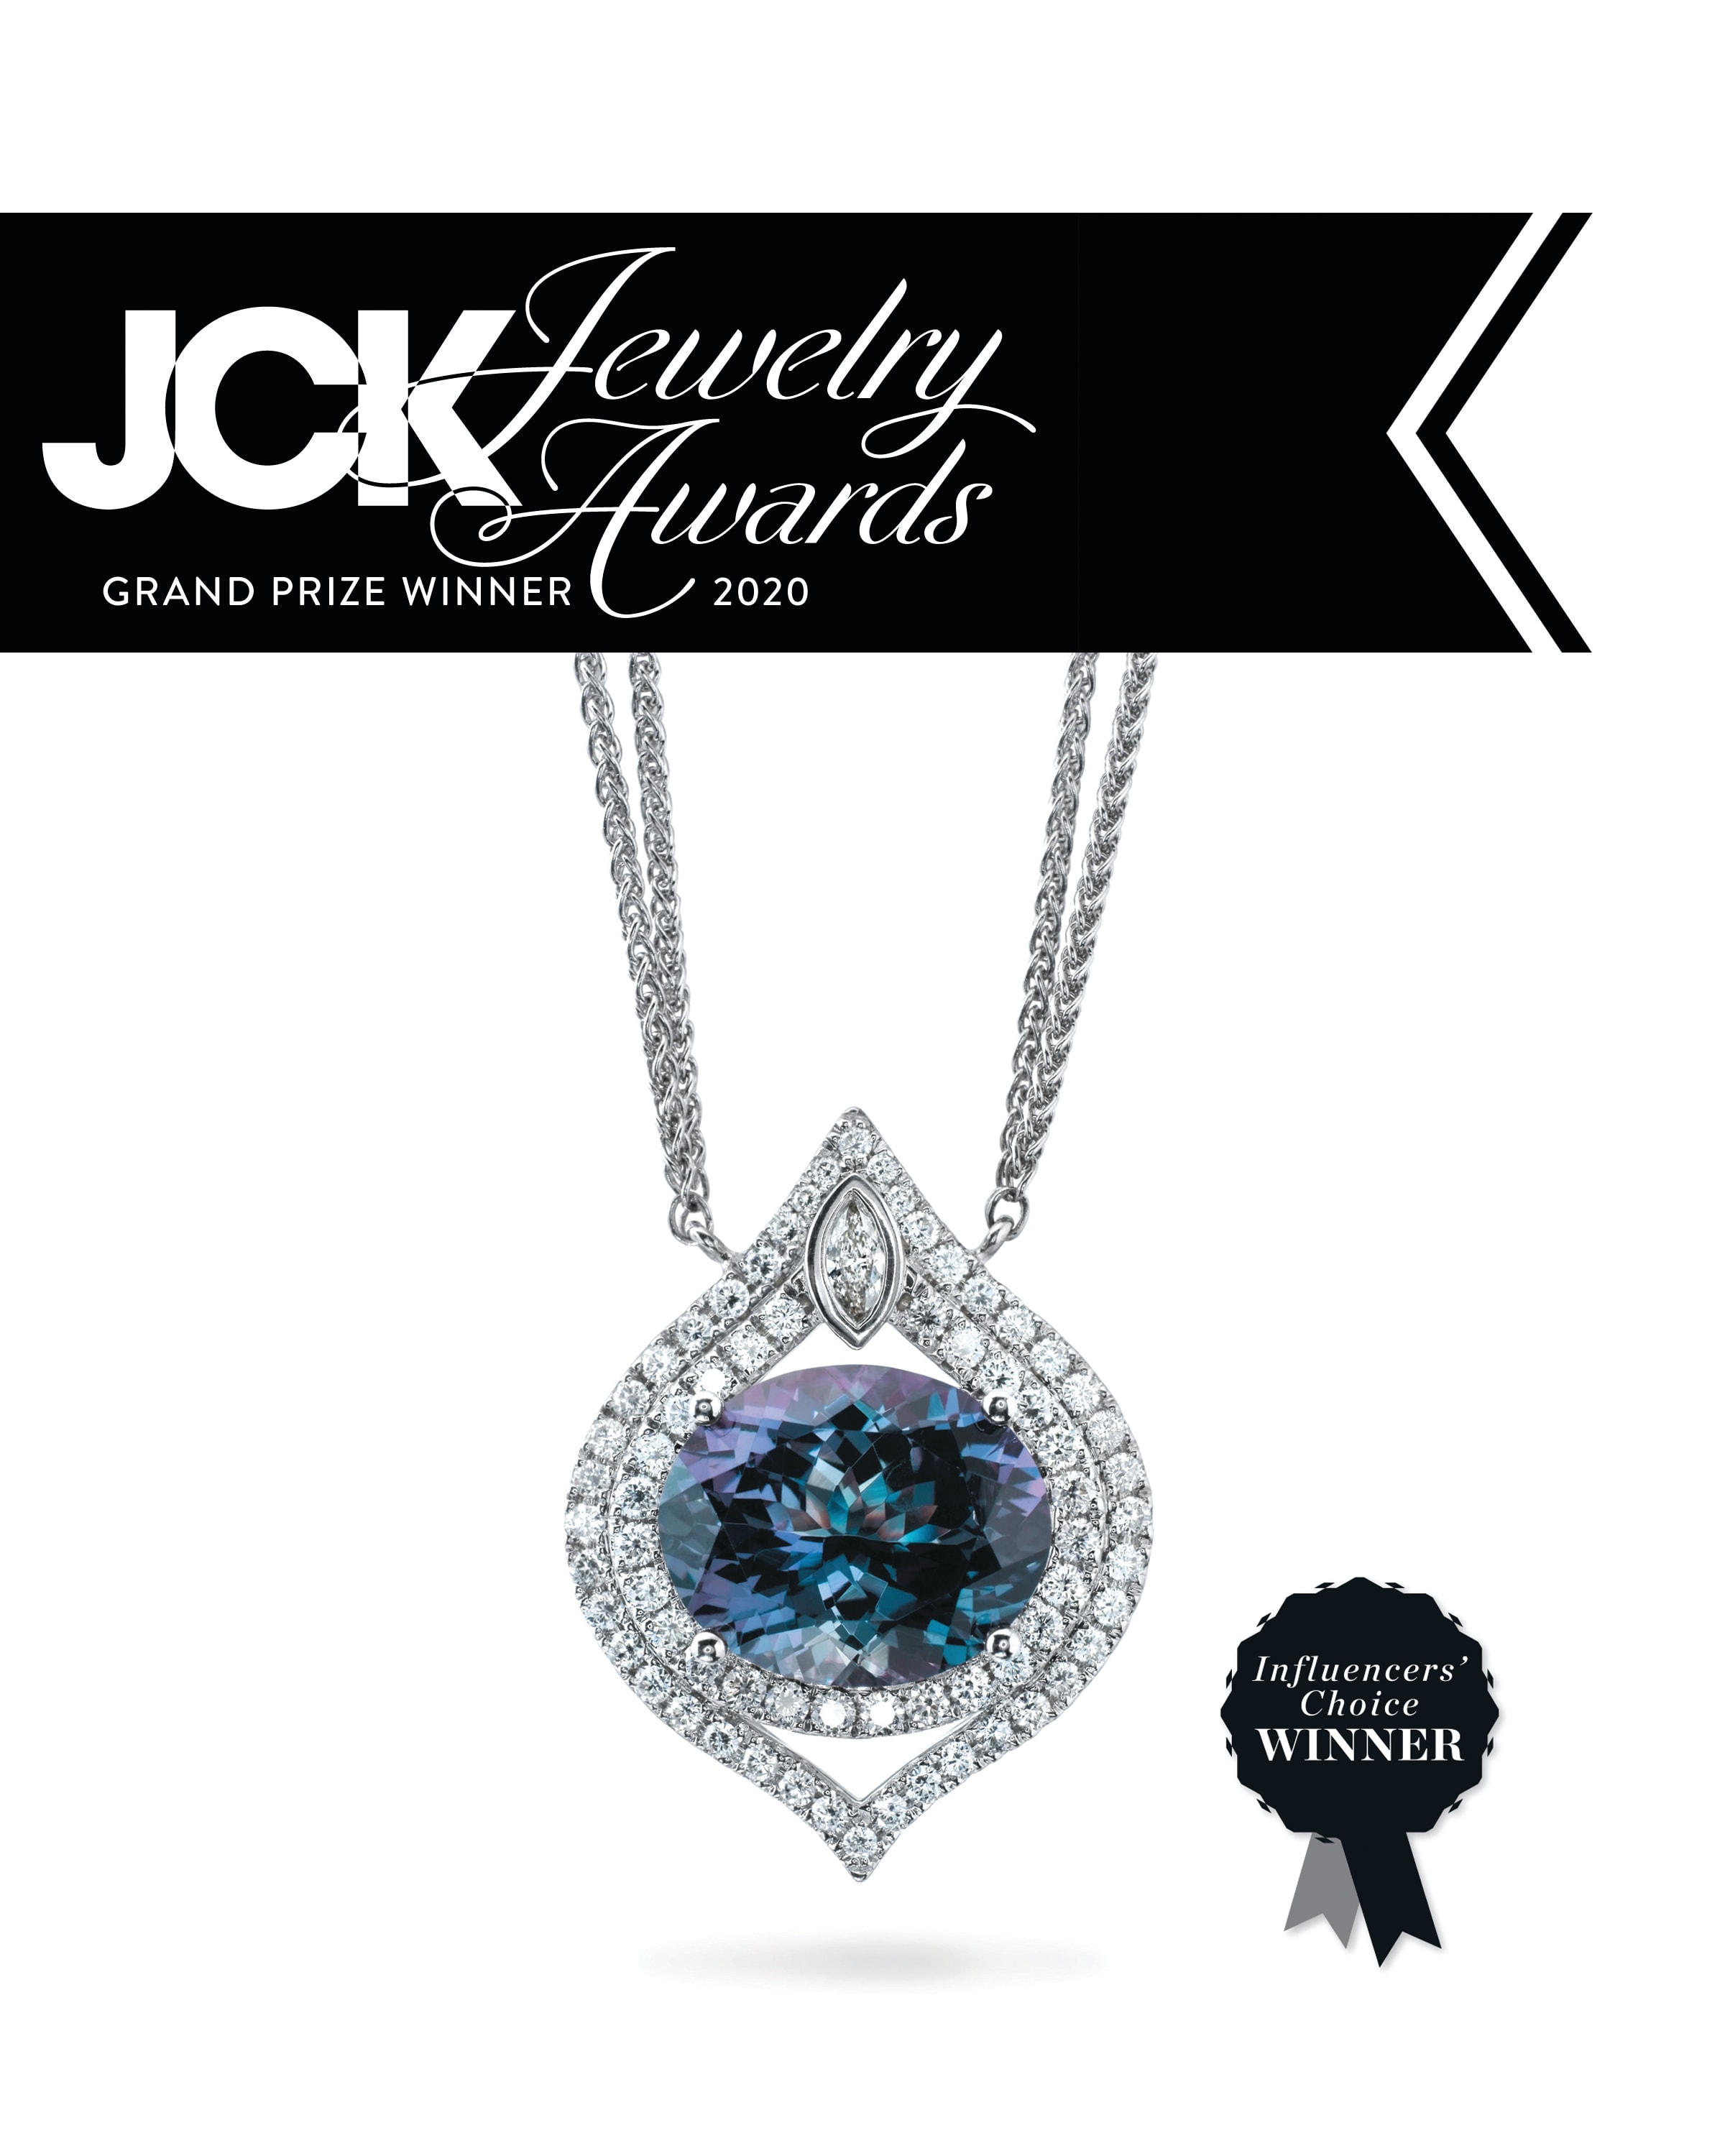 Tail Feather 14k white gold necklace with 6.59 ct. peacock tanzanite and 1 ct. t.w. diamonds receiving a Grand Prize and Influencers' Choice Award.